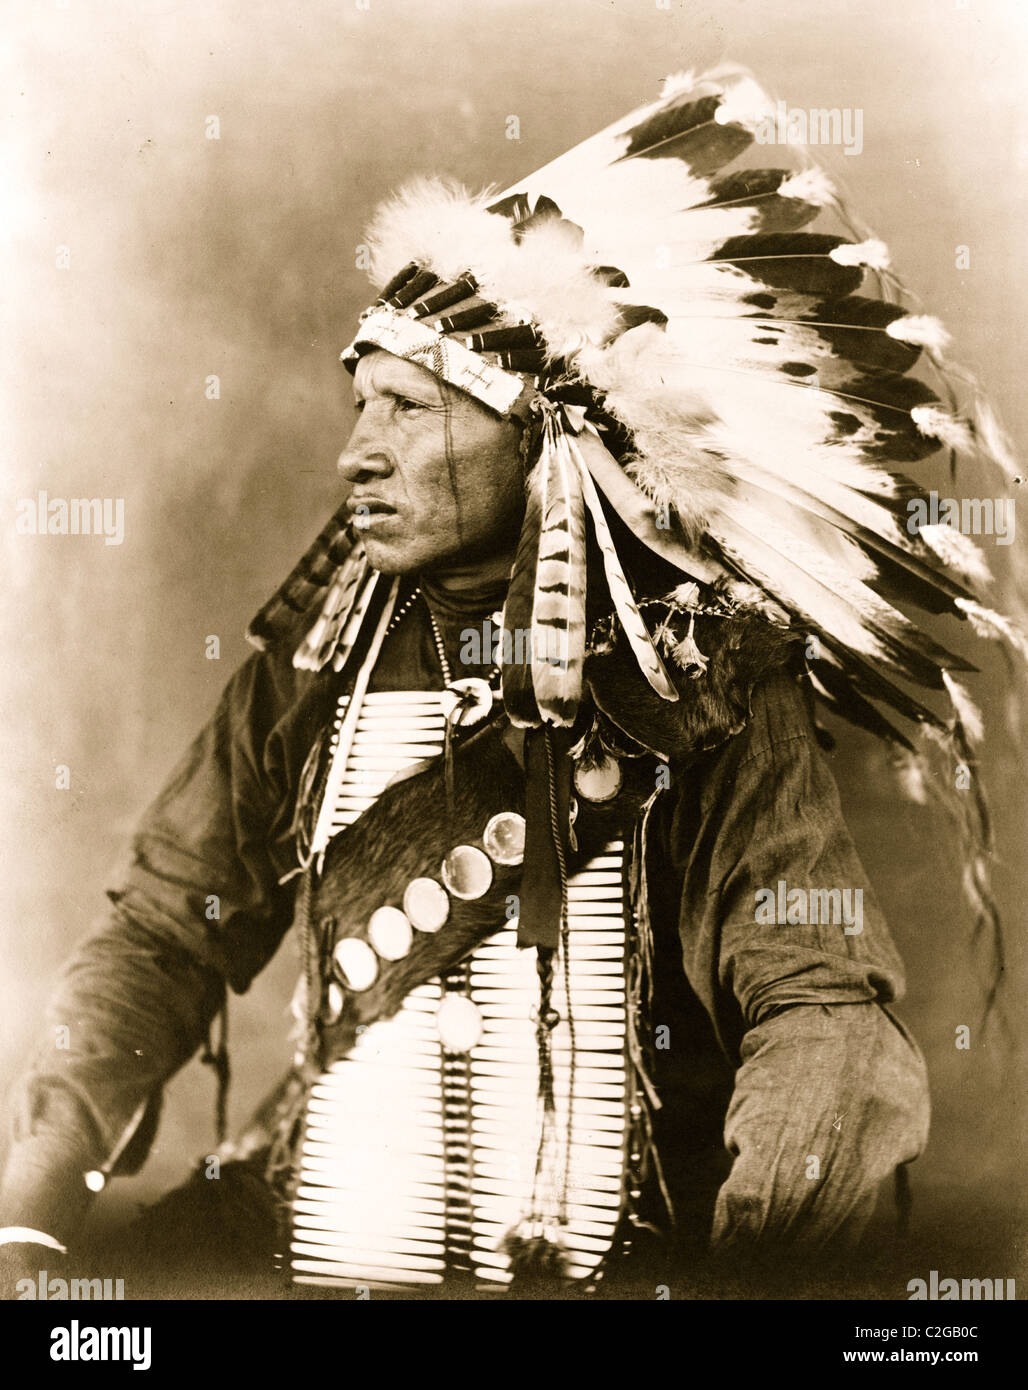 Sioux Indian High Resolution Stock Photography And Images Alamy